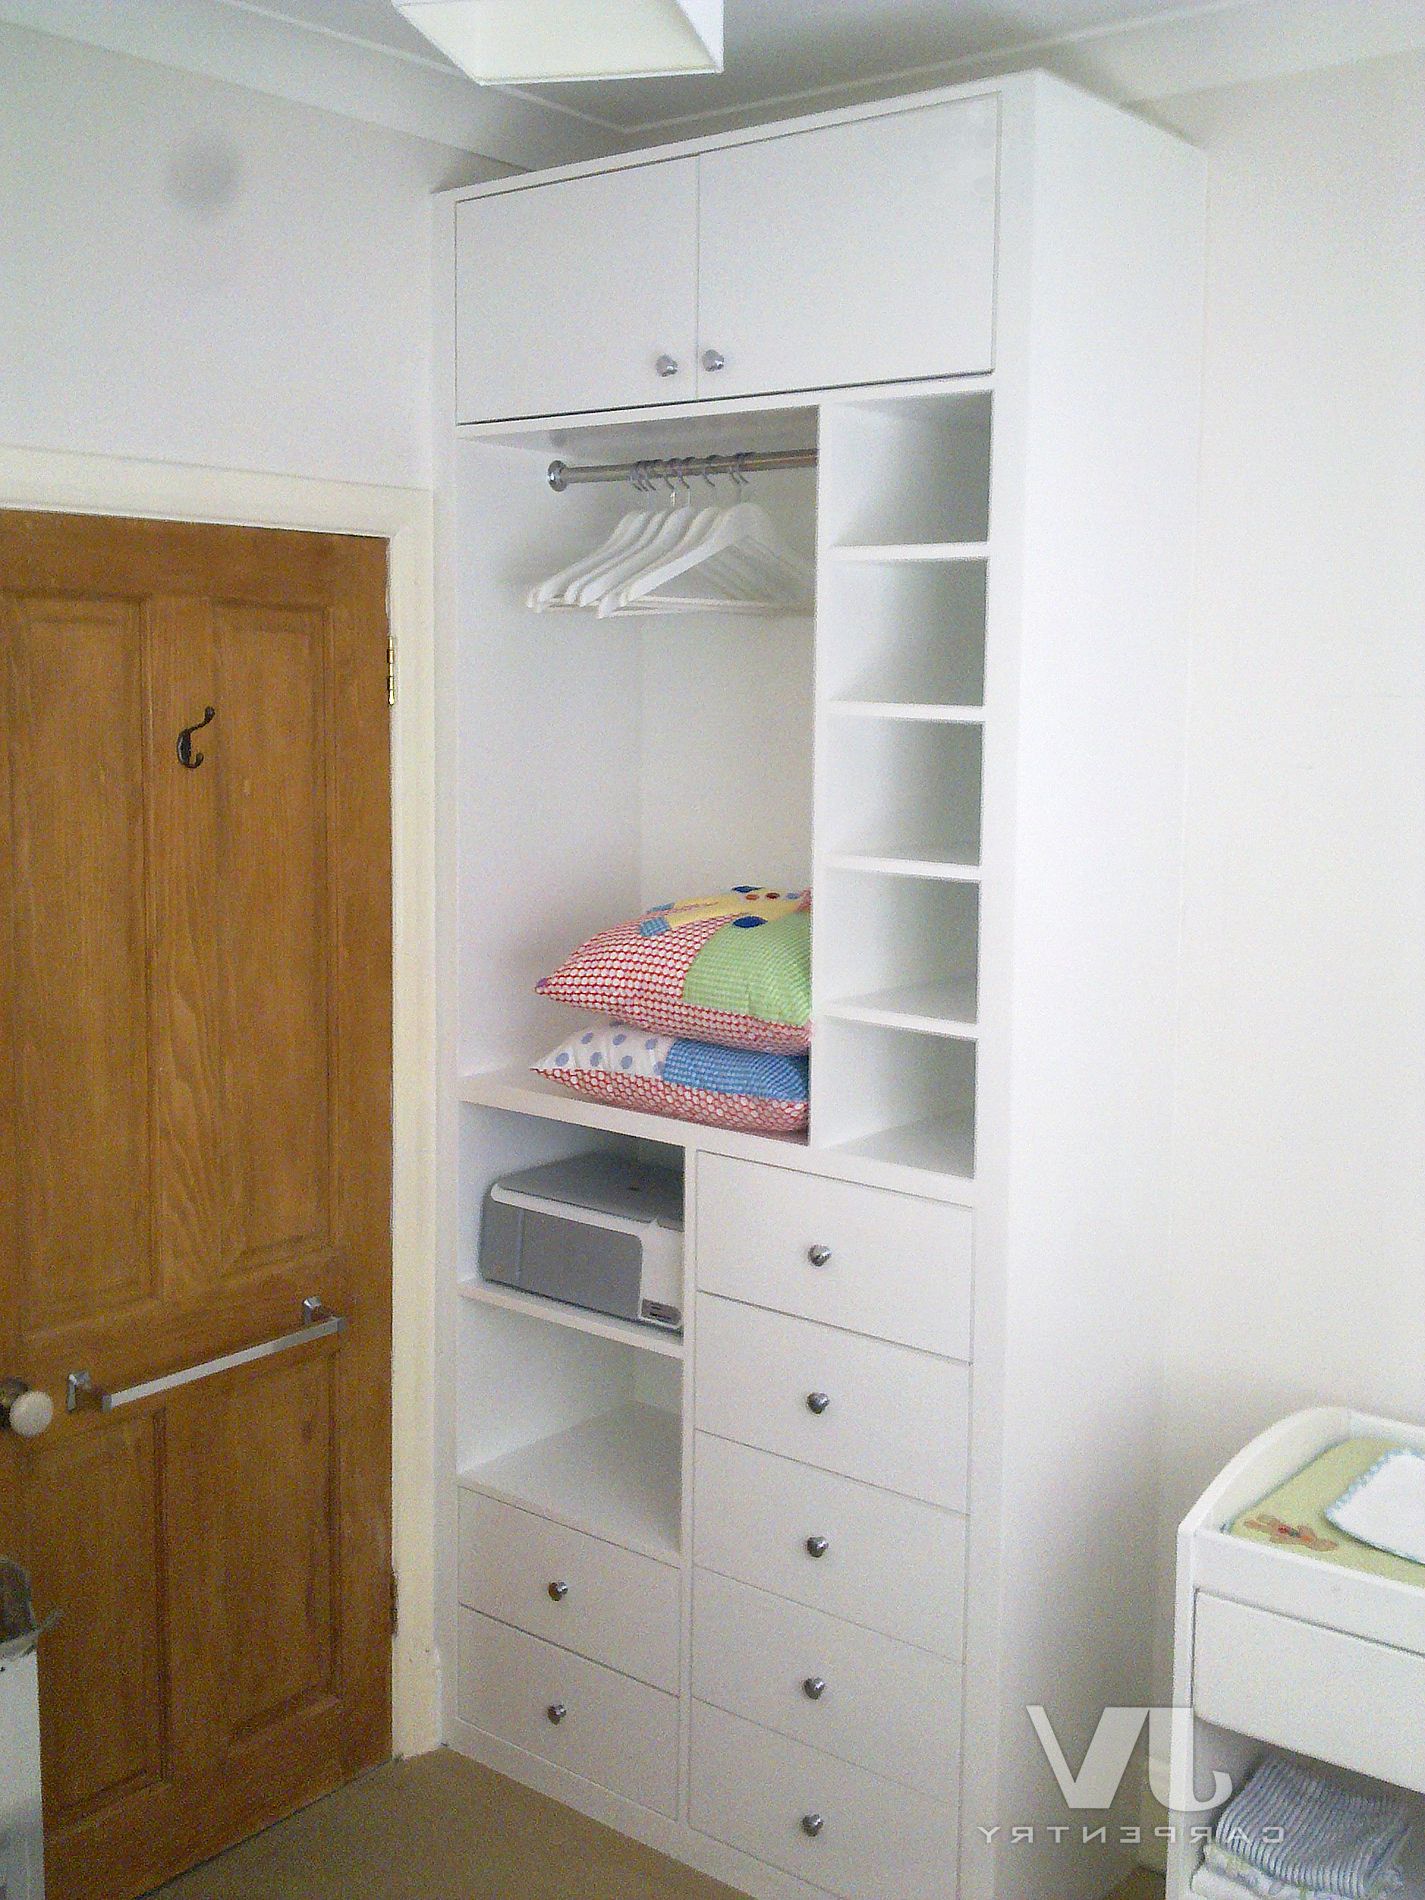 14 Fitted Wardrobe Ideas For A Small Bedroom | Jv Carpentry Pertaining To Short Wardrobes (Gallery 10 of 20)